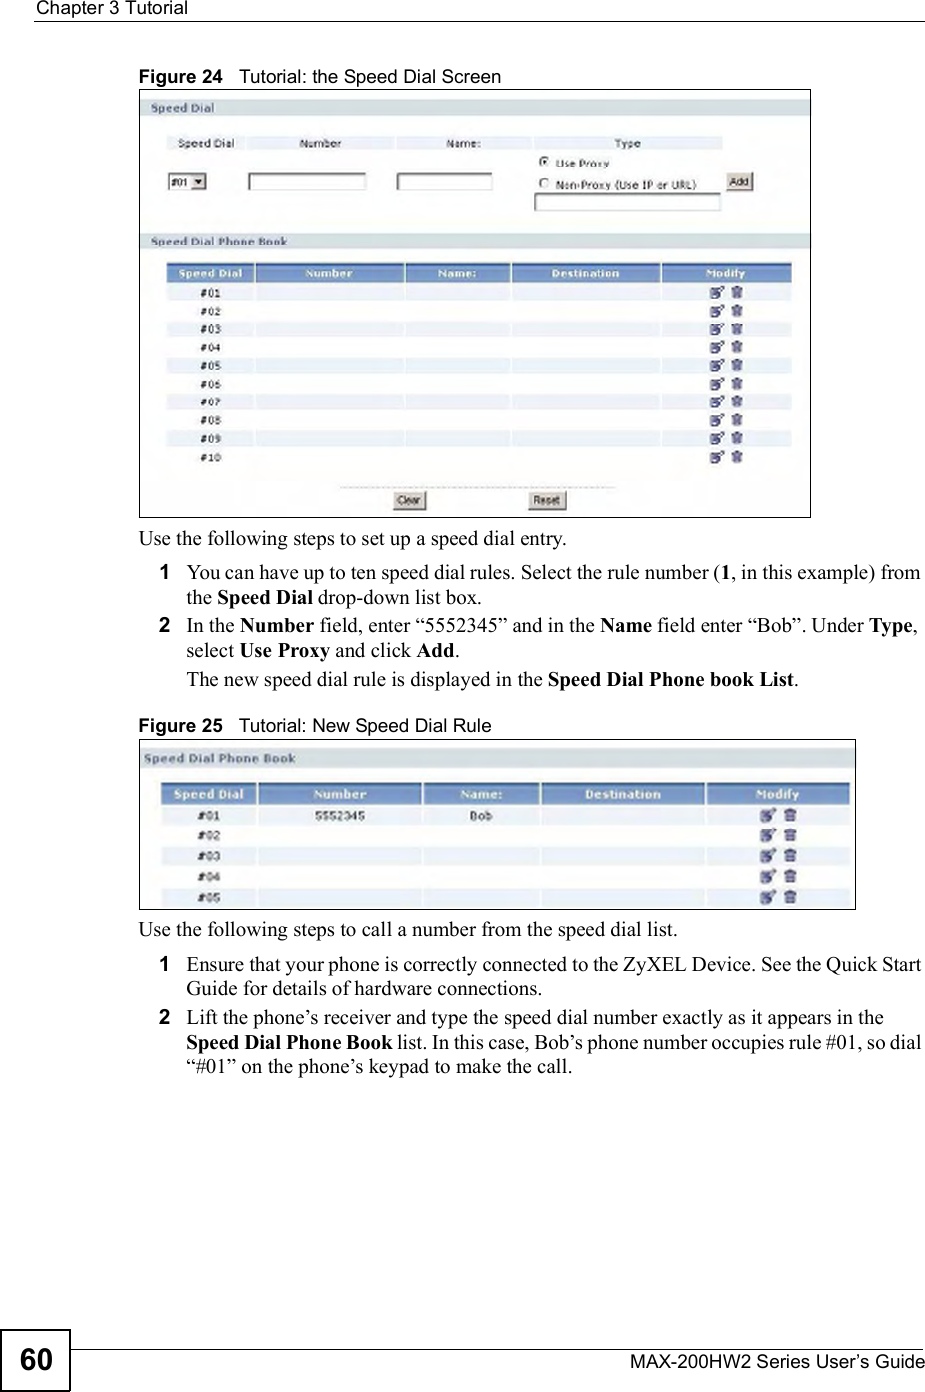 Chapter 3TutorialMAX-200HW2 Series User s Guide60Figure 24   Tutorial: the Speed Dial ScreenUse the following steps to set up a speed dial entry.1You can have up to ten speed dial rules. Select the rule number (1, in this example) from the Speed Dial drop-down list box.2In the Number field, enter &quot;5552345# and in the Name field enter &quot;Bob#. Under Type,select Use Proxy and click Add.The new speed dial rule is displayed in the Speed Dial Phone book List.Figure 25   Tutorial: New Speed Dial RuleUse the following steps to call a number from the speed dial list.1Ensure that your phone is correctly connected to the ZyXEL Device. See the Quick Start Guide for details of hardware connections.2Lift the phone!s receiver and type the speed dial number exactly as it appears in the Speed Dial Phone Book list. In this case, Bob!s phone number occupies rule #01, so dial &quot;#01# on the phone!s keypad to make the call.